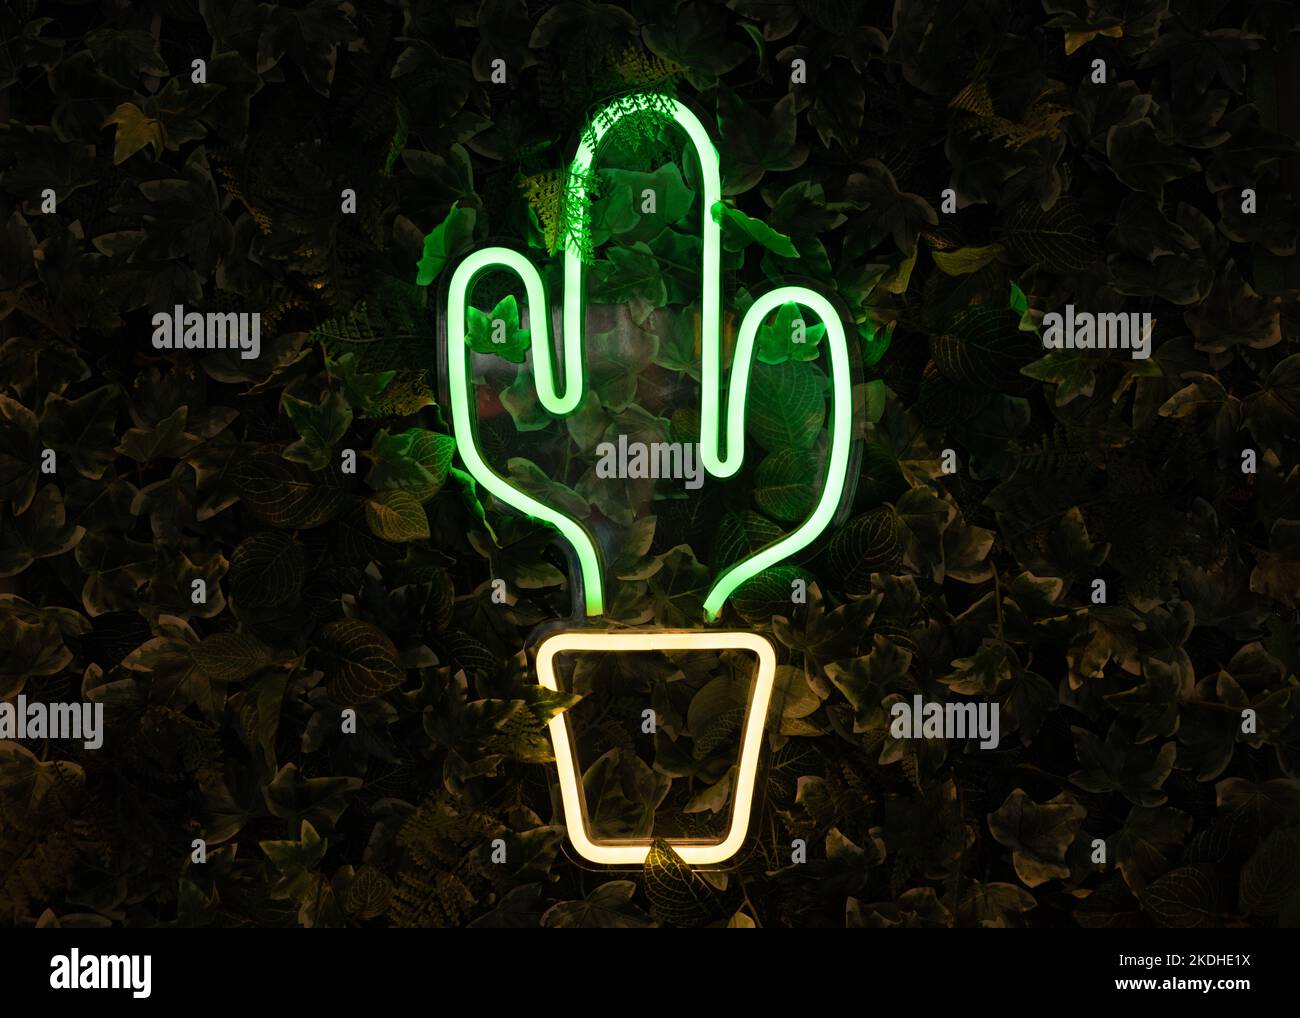 light up cactus on a wall of leaves Stock Photo